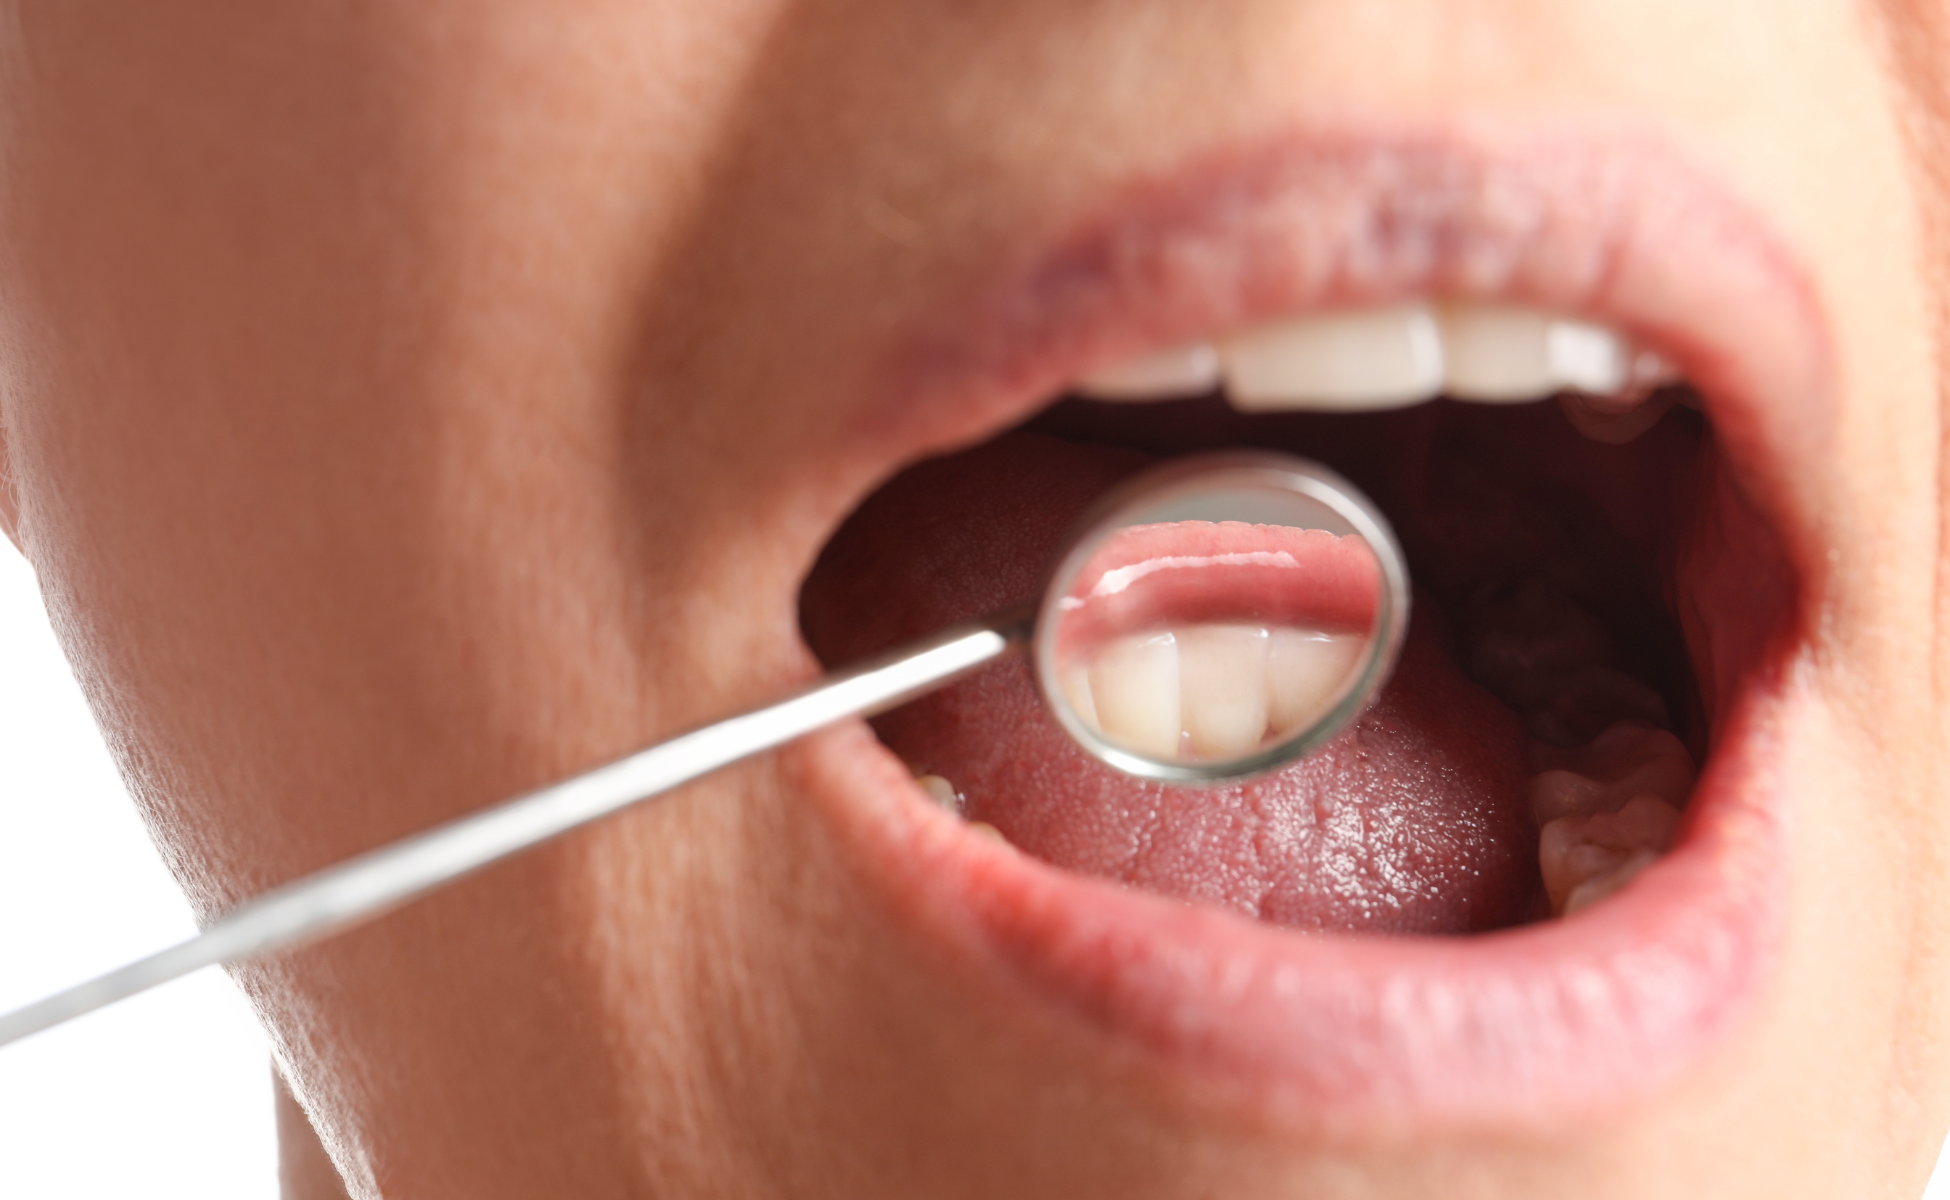 Oral Cancer Awareness: Symptoms, Prevention, and Early Detection